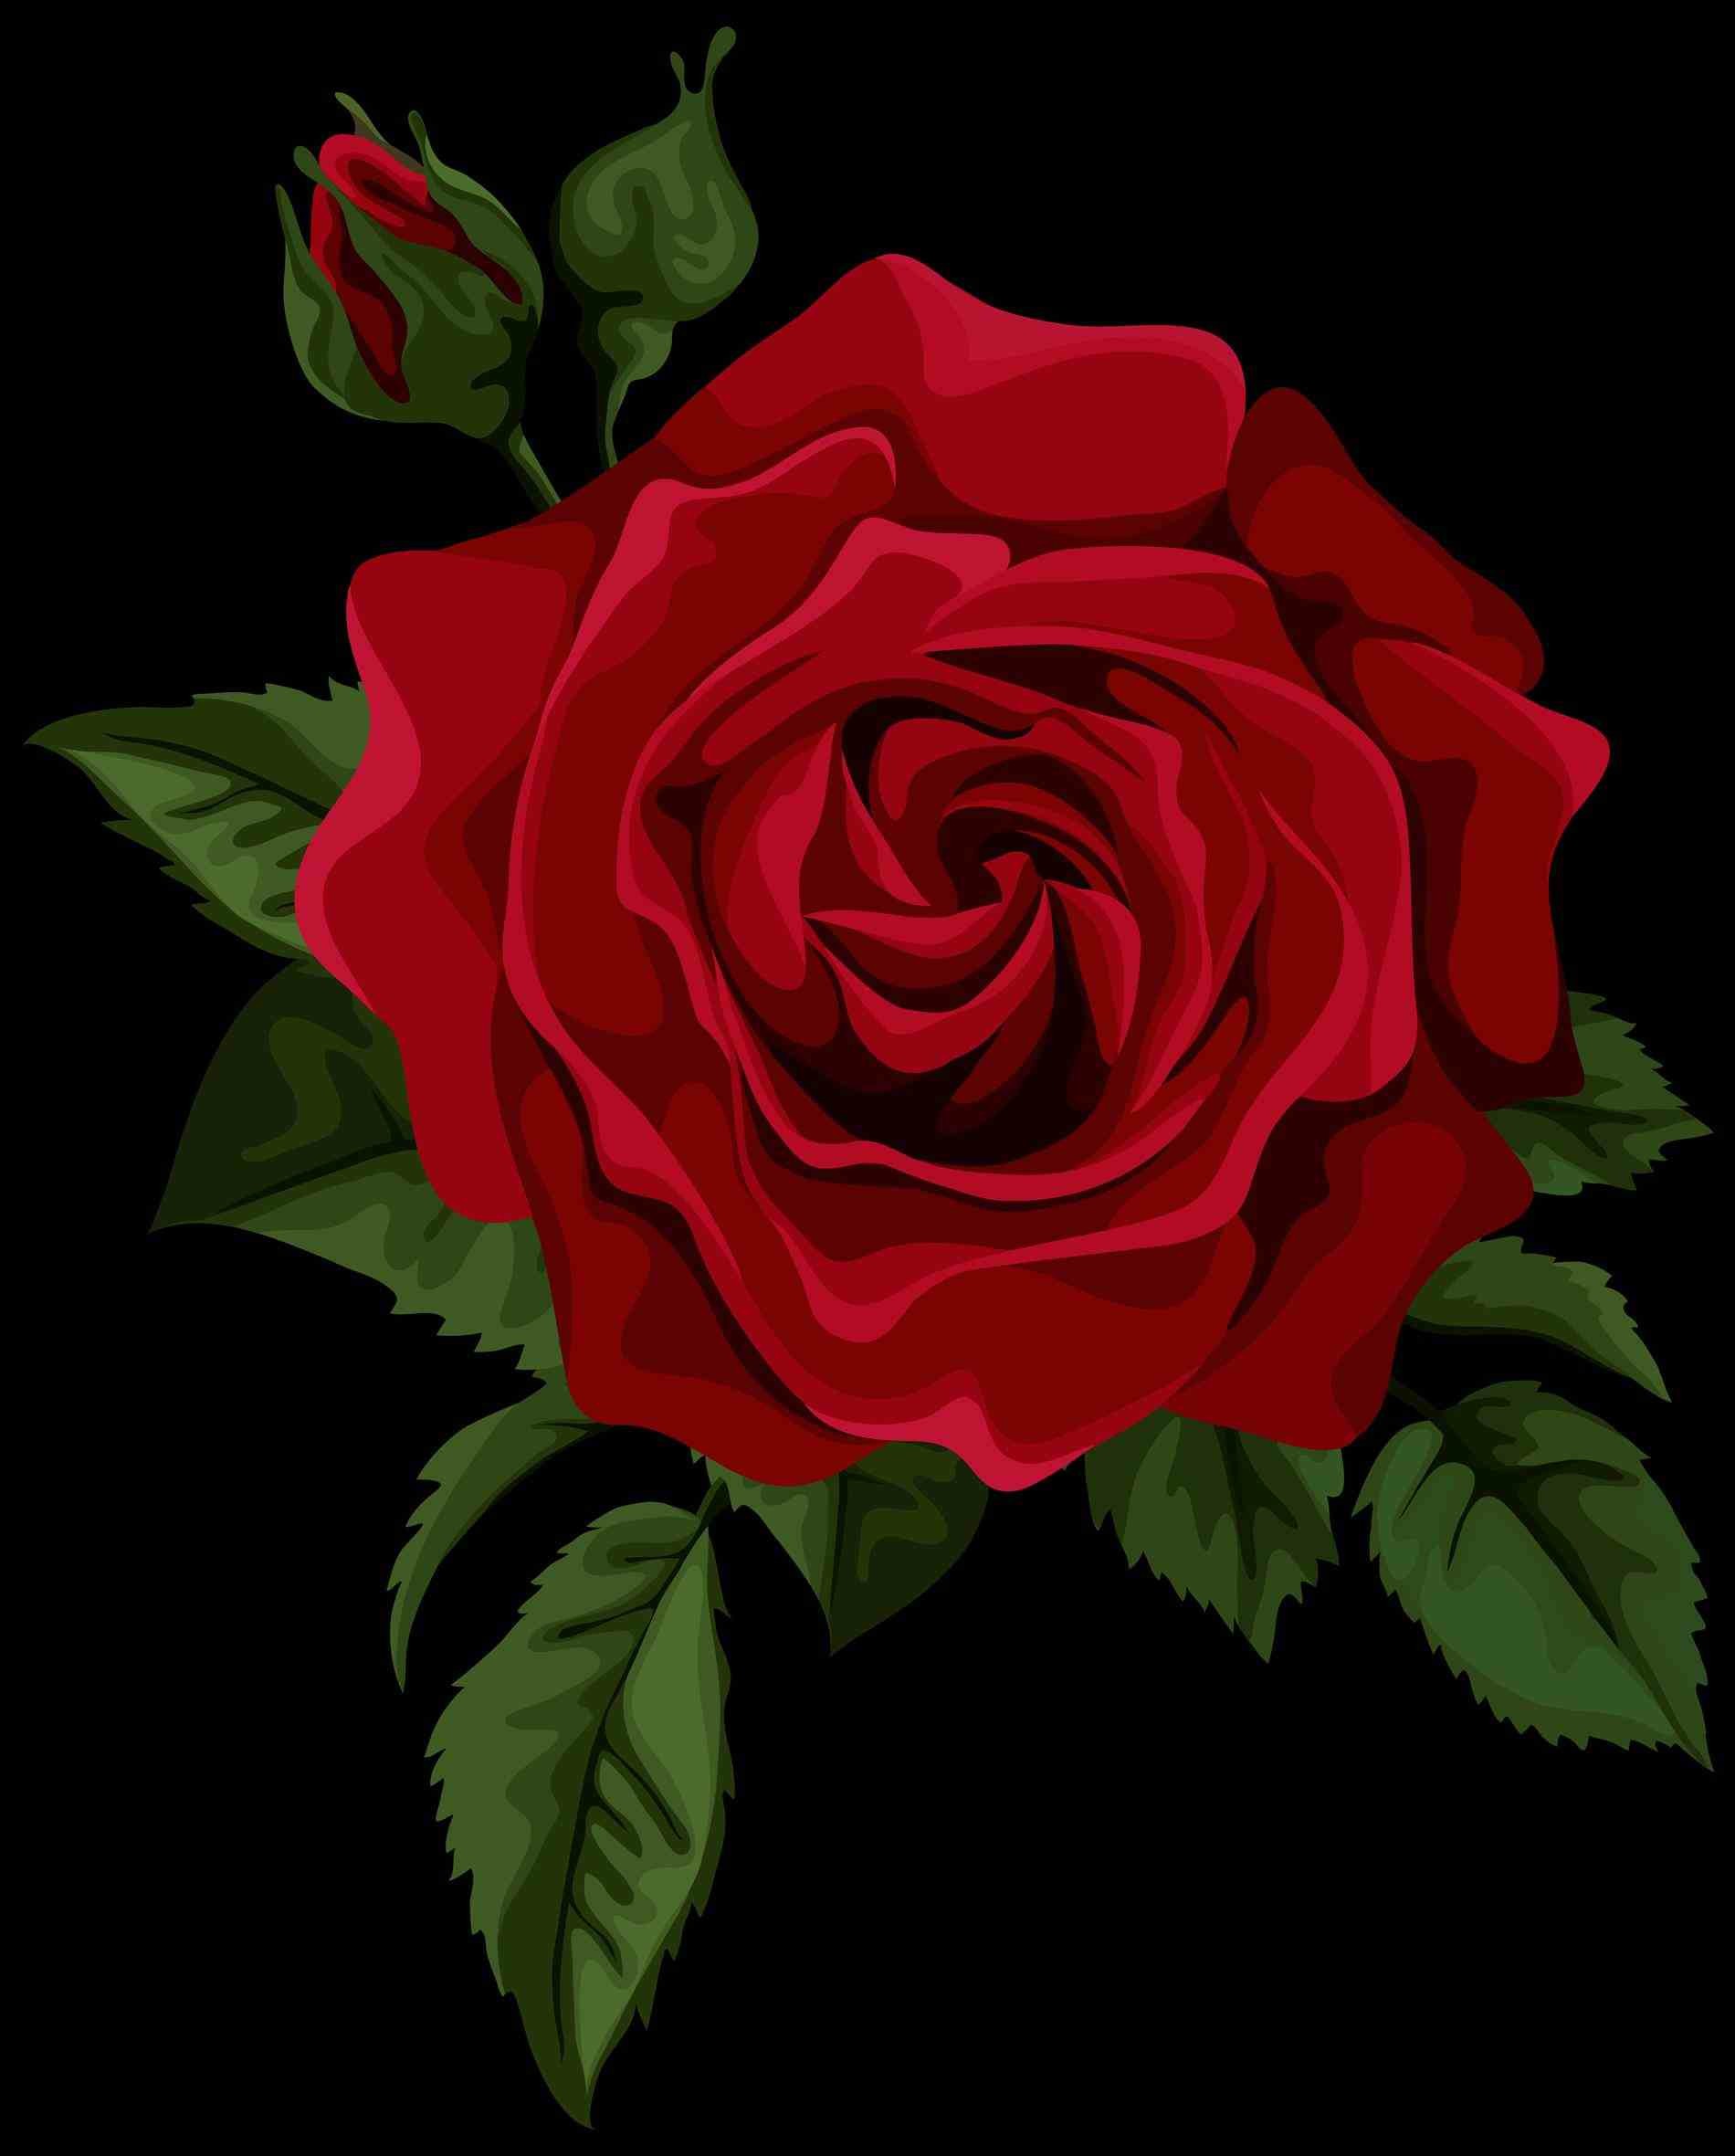 Rose Wallpaper Hd For Mobile Free Download